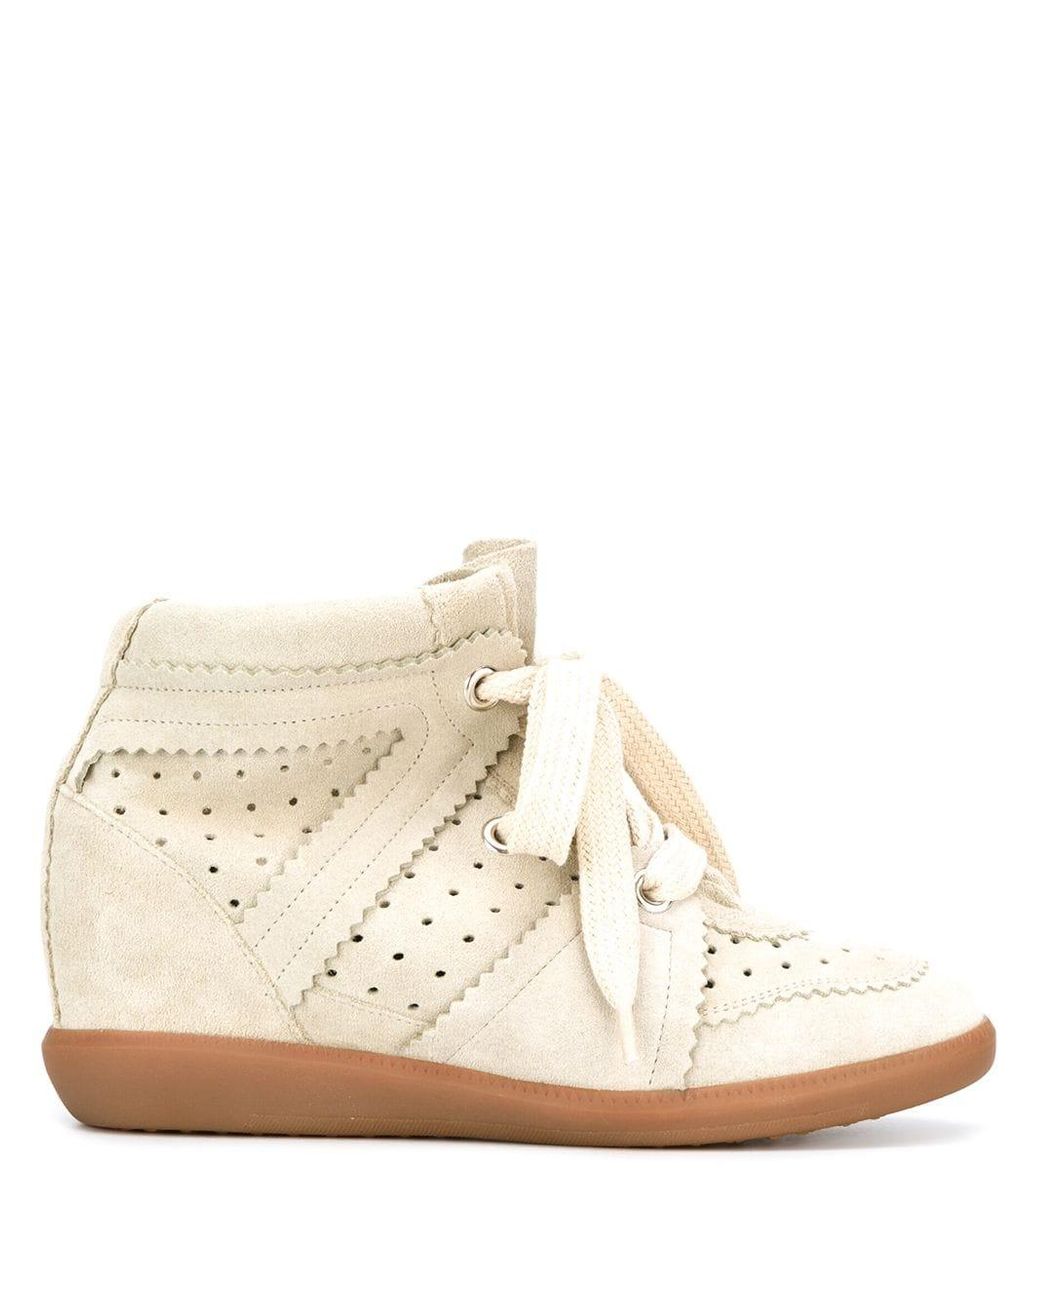 Isabel Marant Suede Bobby Wedge Sneakers in Grey (Gray) | Lyst